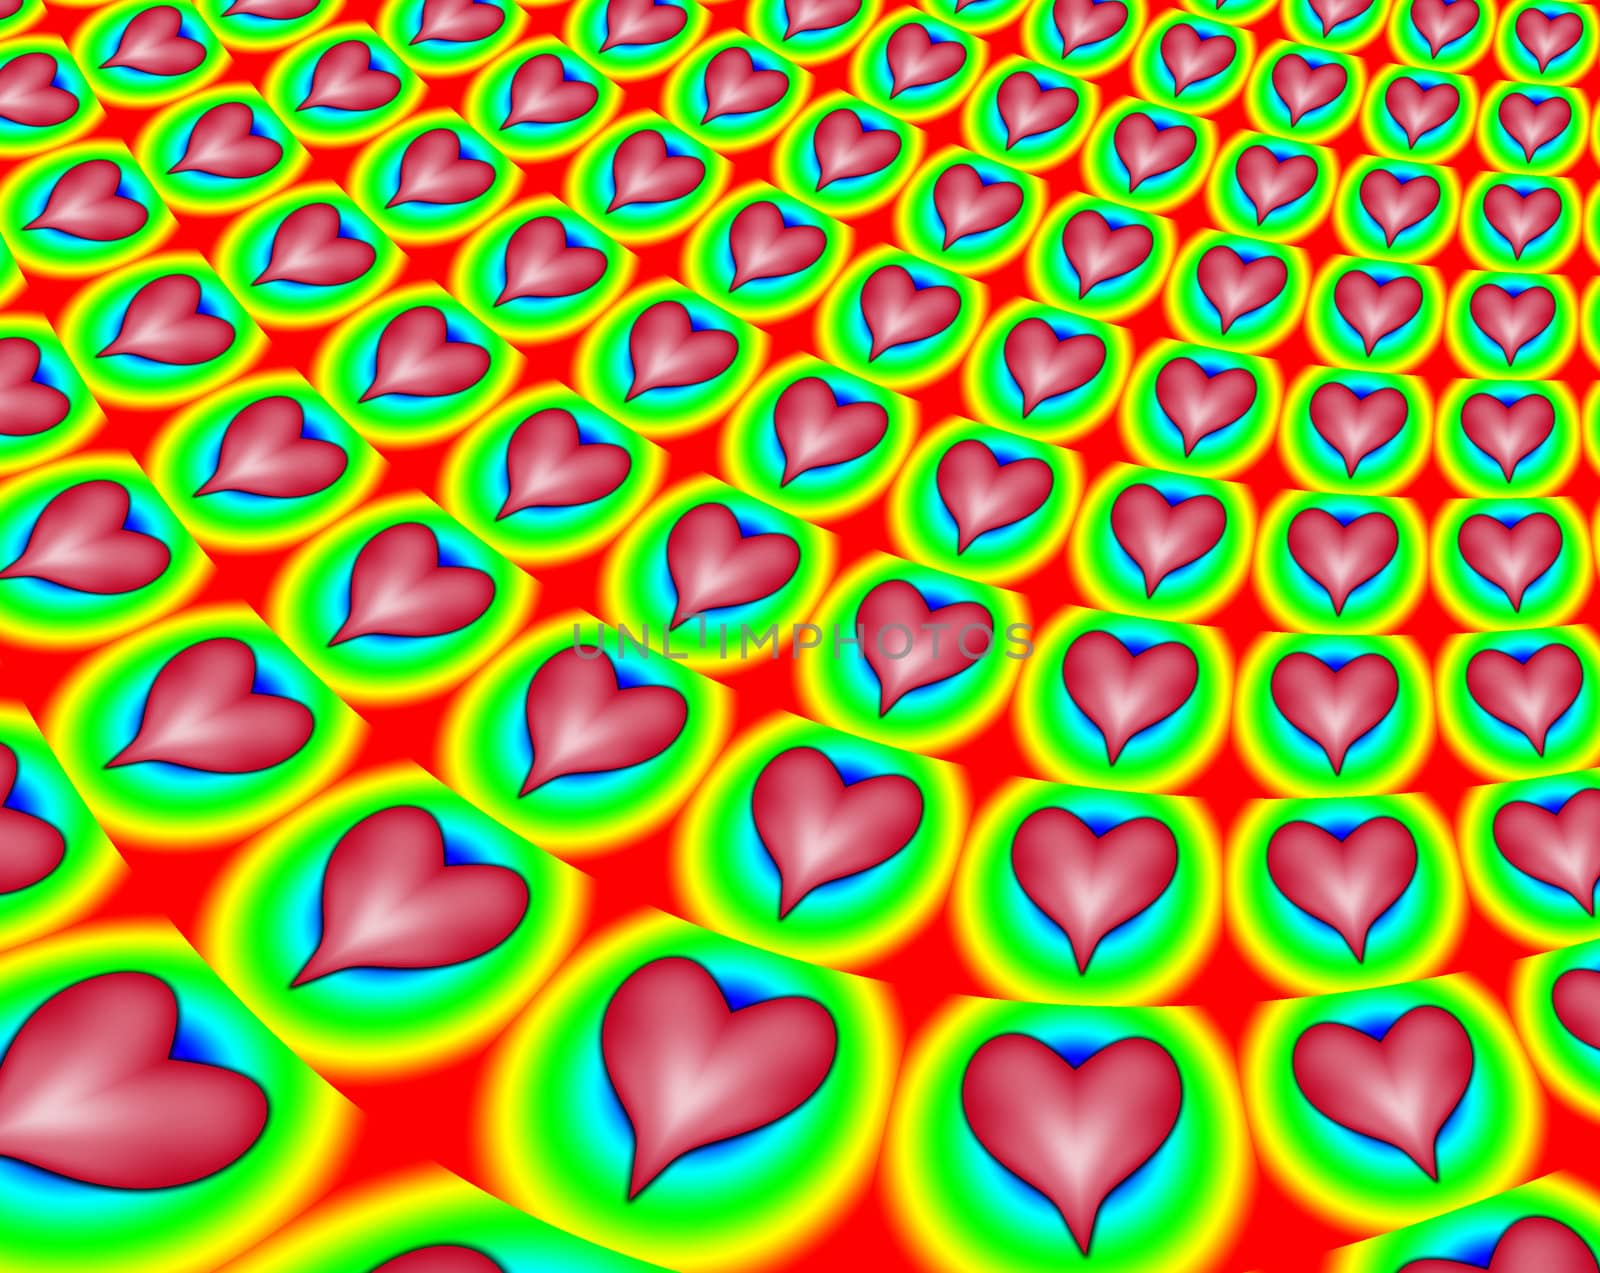 Fractal pattern made out of colourful hearts.